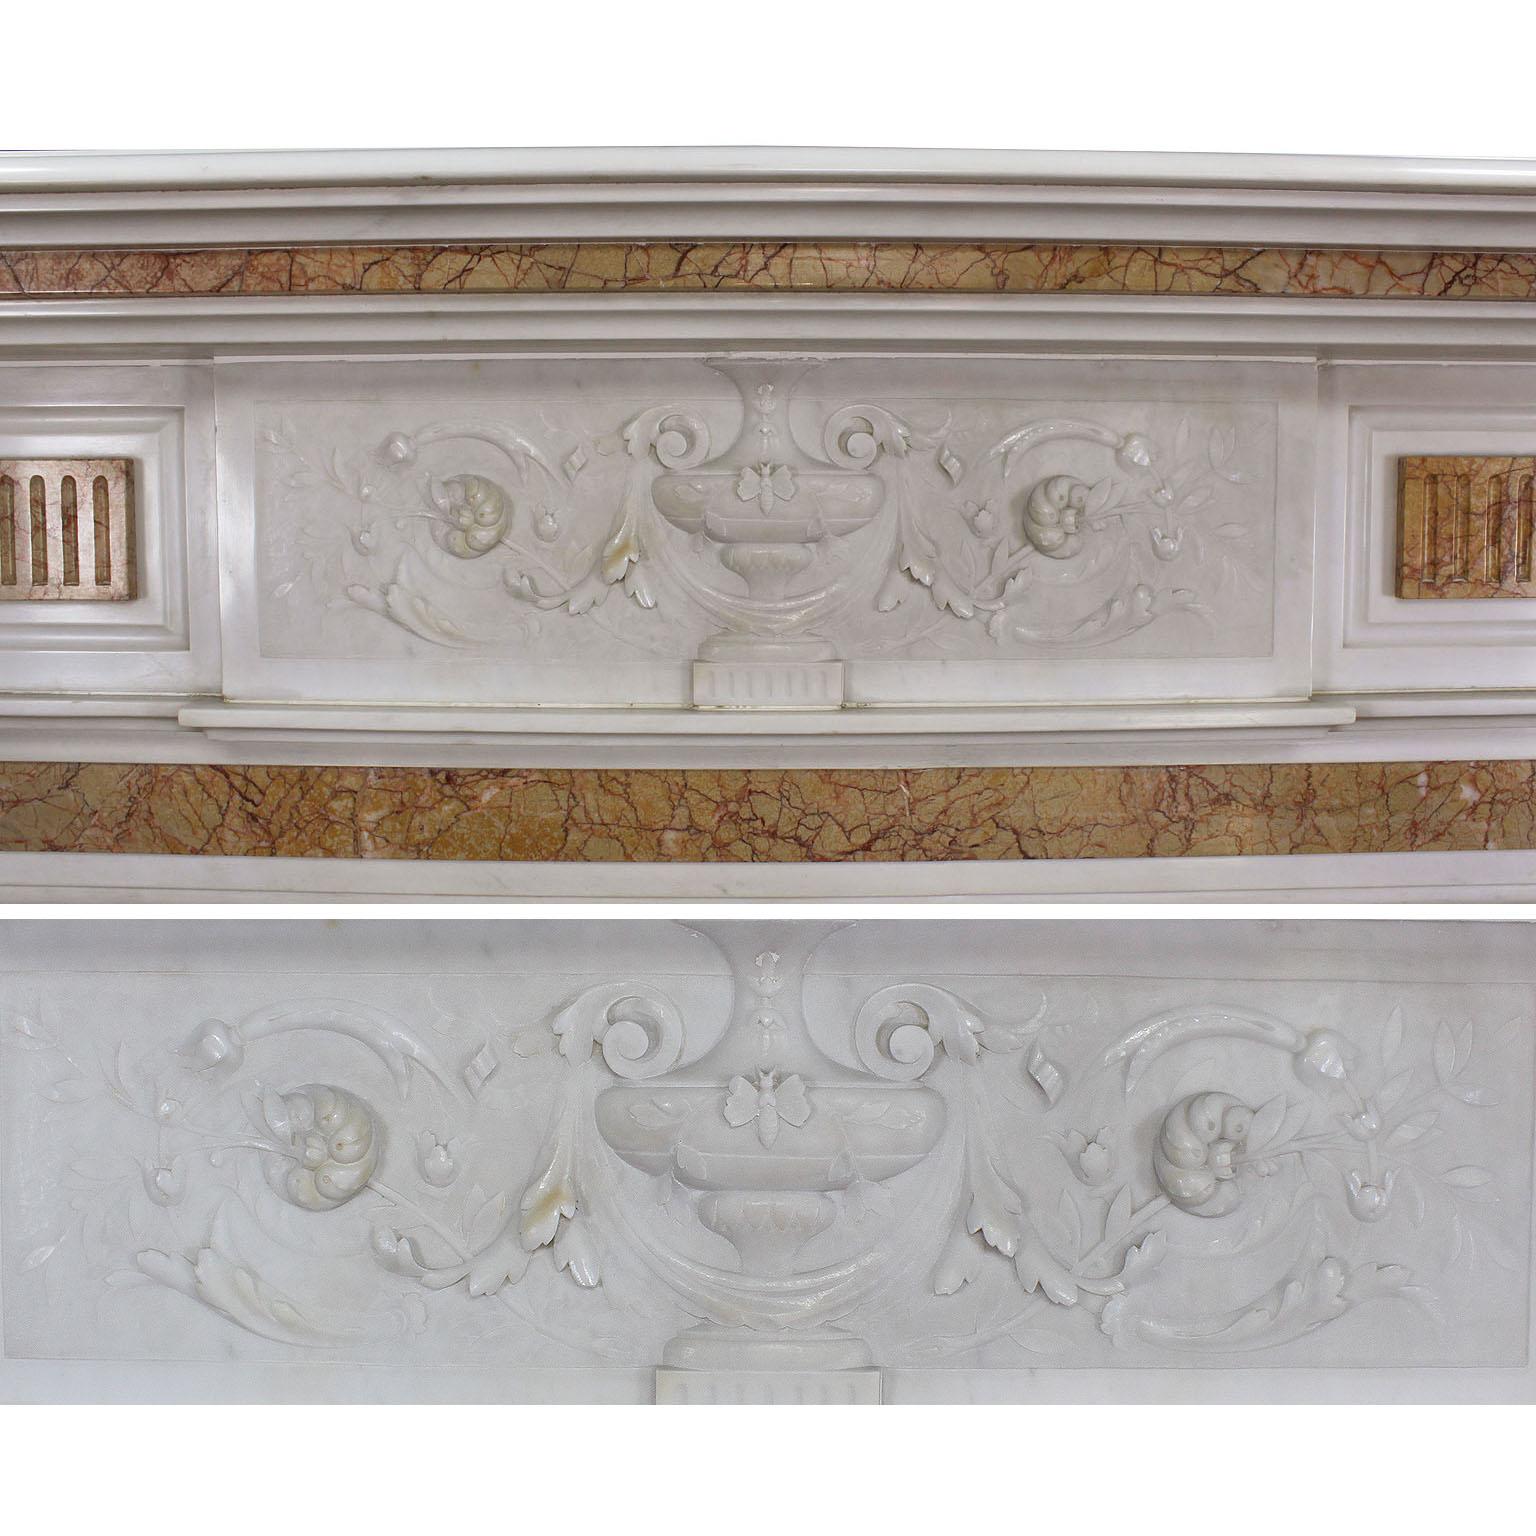 A fine English neo-classical and Georgian style carved statuary and Spanish brocatelle marble fireplace mantel, surmounted by a pair of columns, urn carvings and centred with a detailed carved marble vase with a bumble-bee, swags, scrolls and